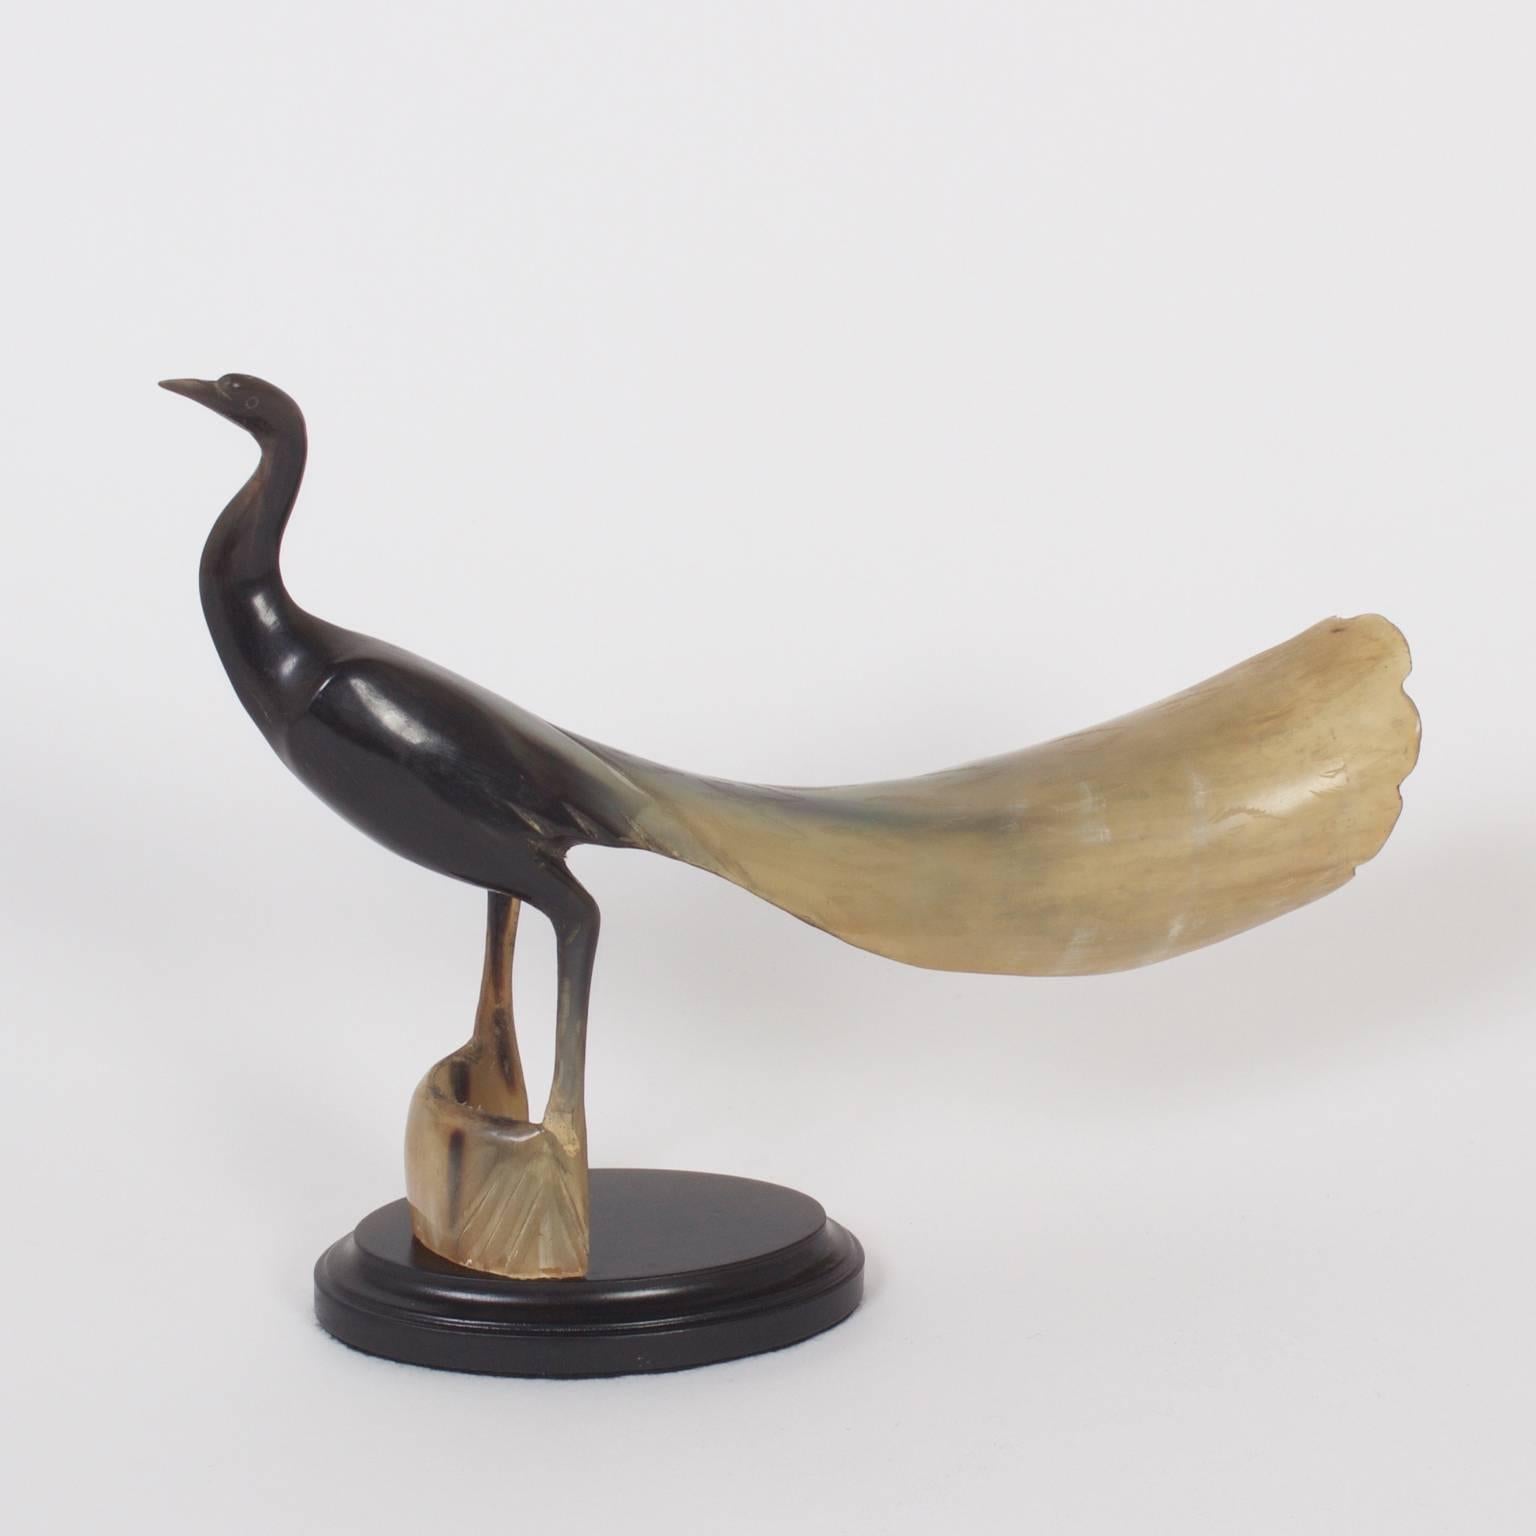 Pair of carved and polished steer horn birds with graceful lines, organic variegated colors, and an elegant presence presented on wood stands.
 